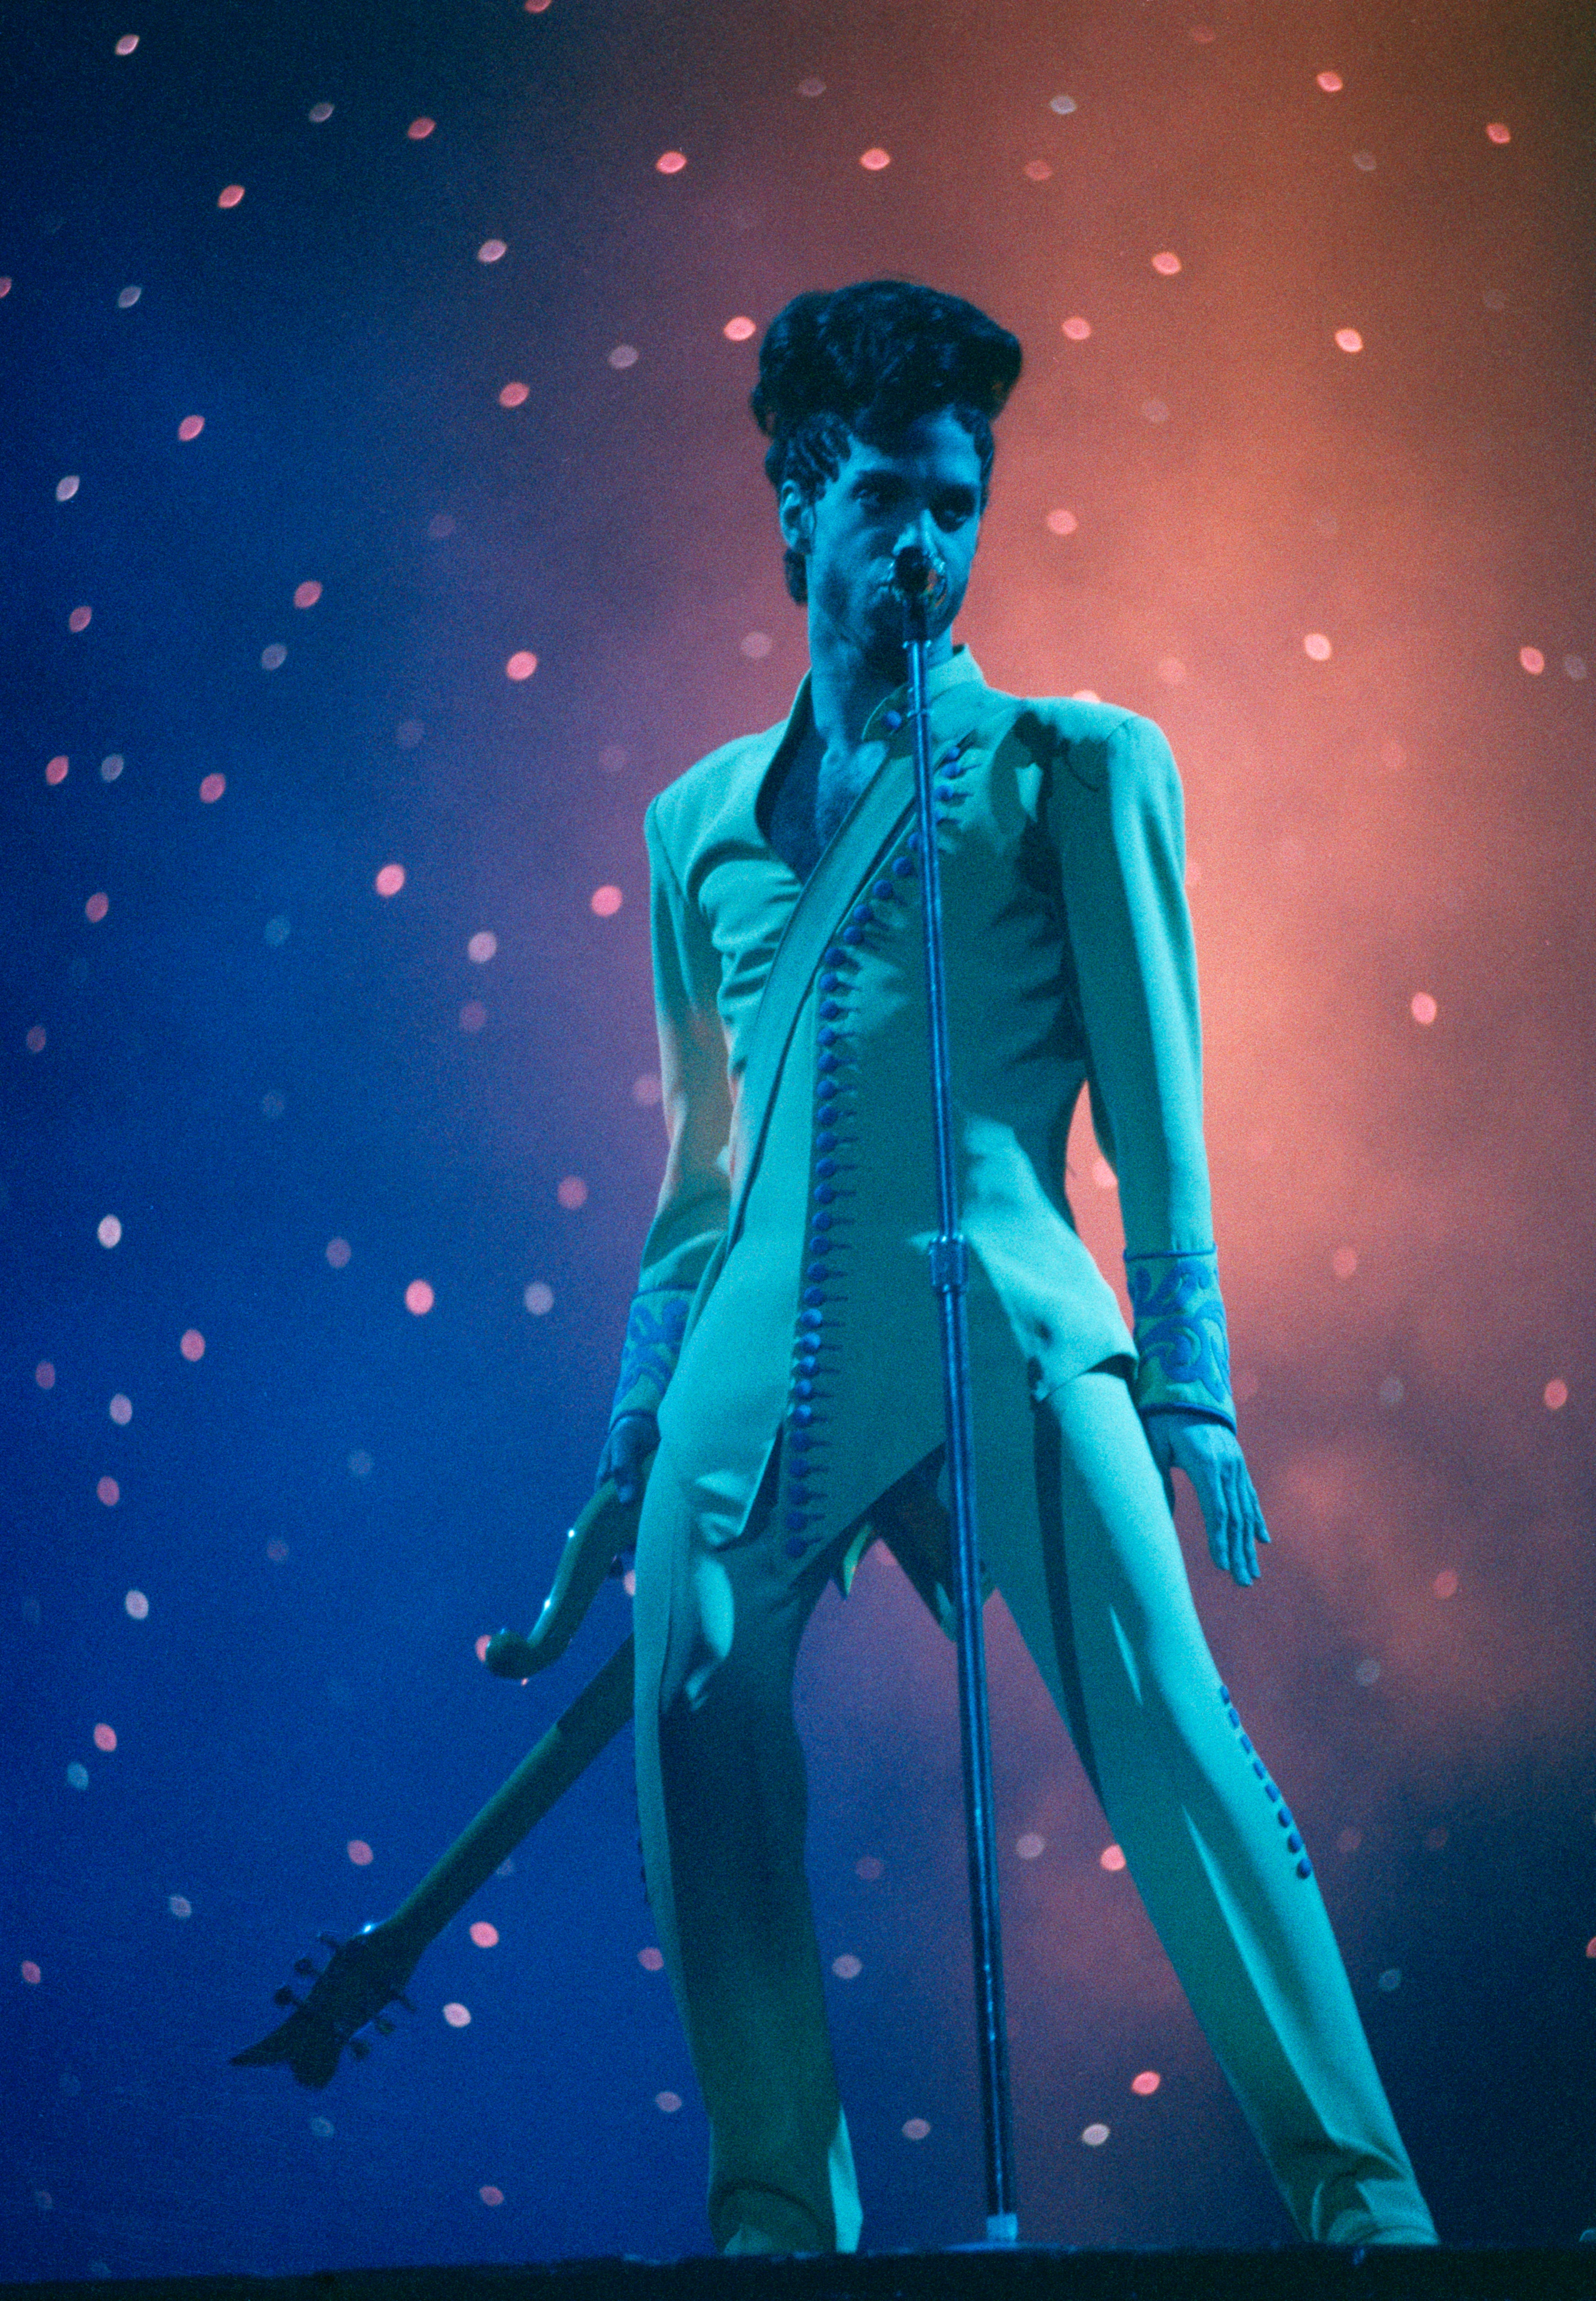 Prince's Most Iconic Fashion Moments
